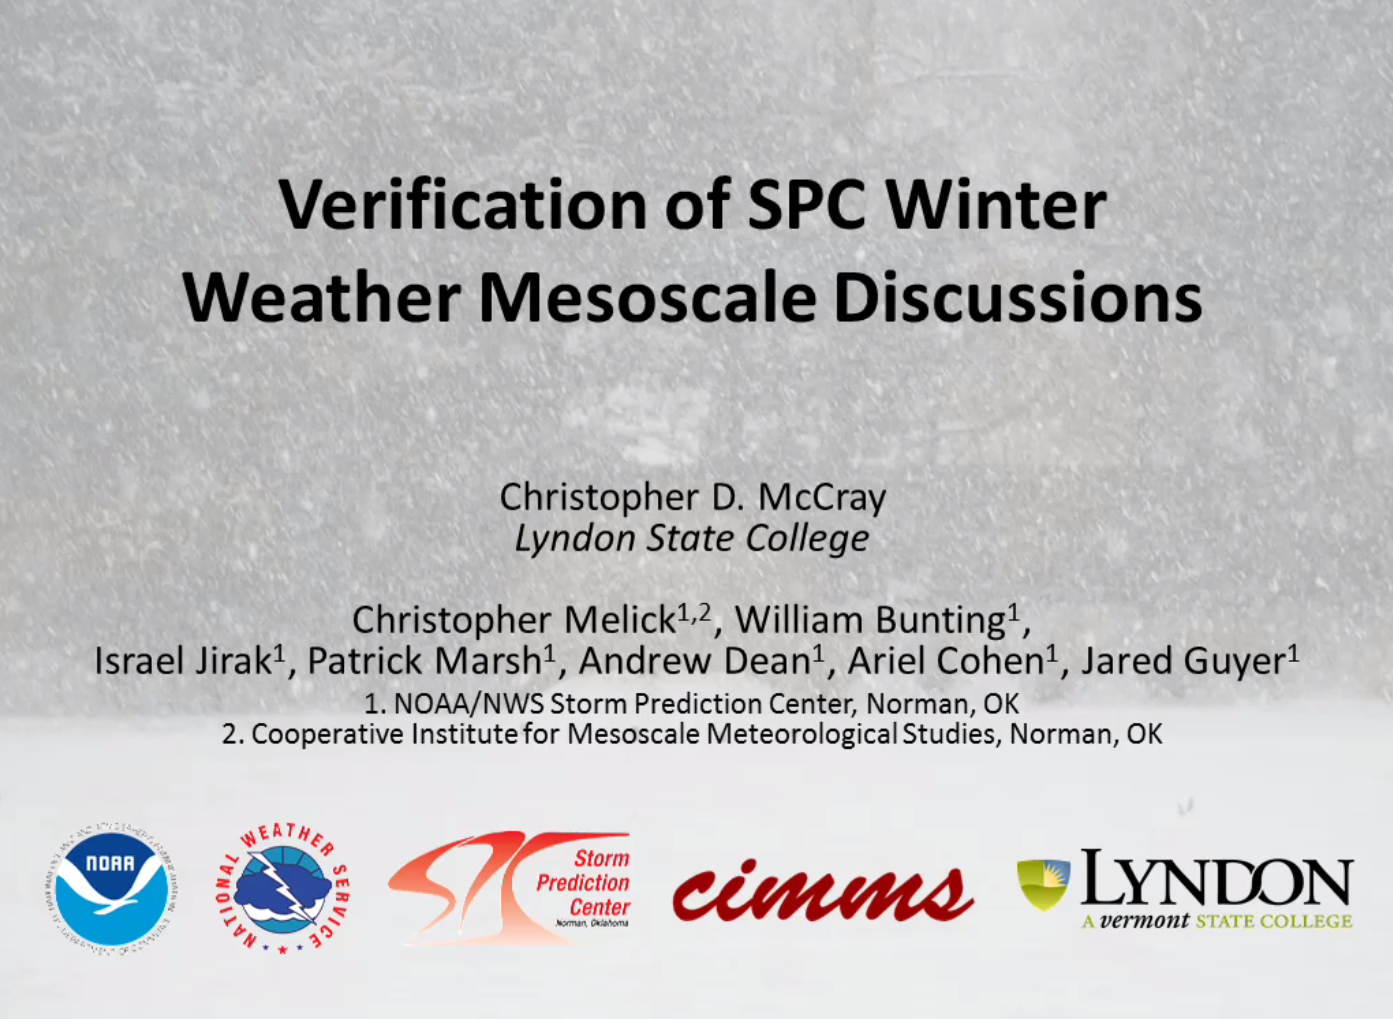 Verification of SPC Winter Weather Mesoscale Discussions